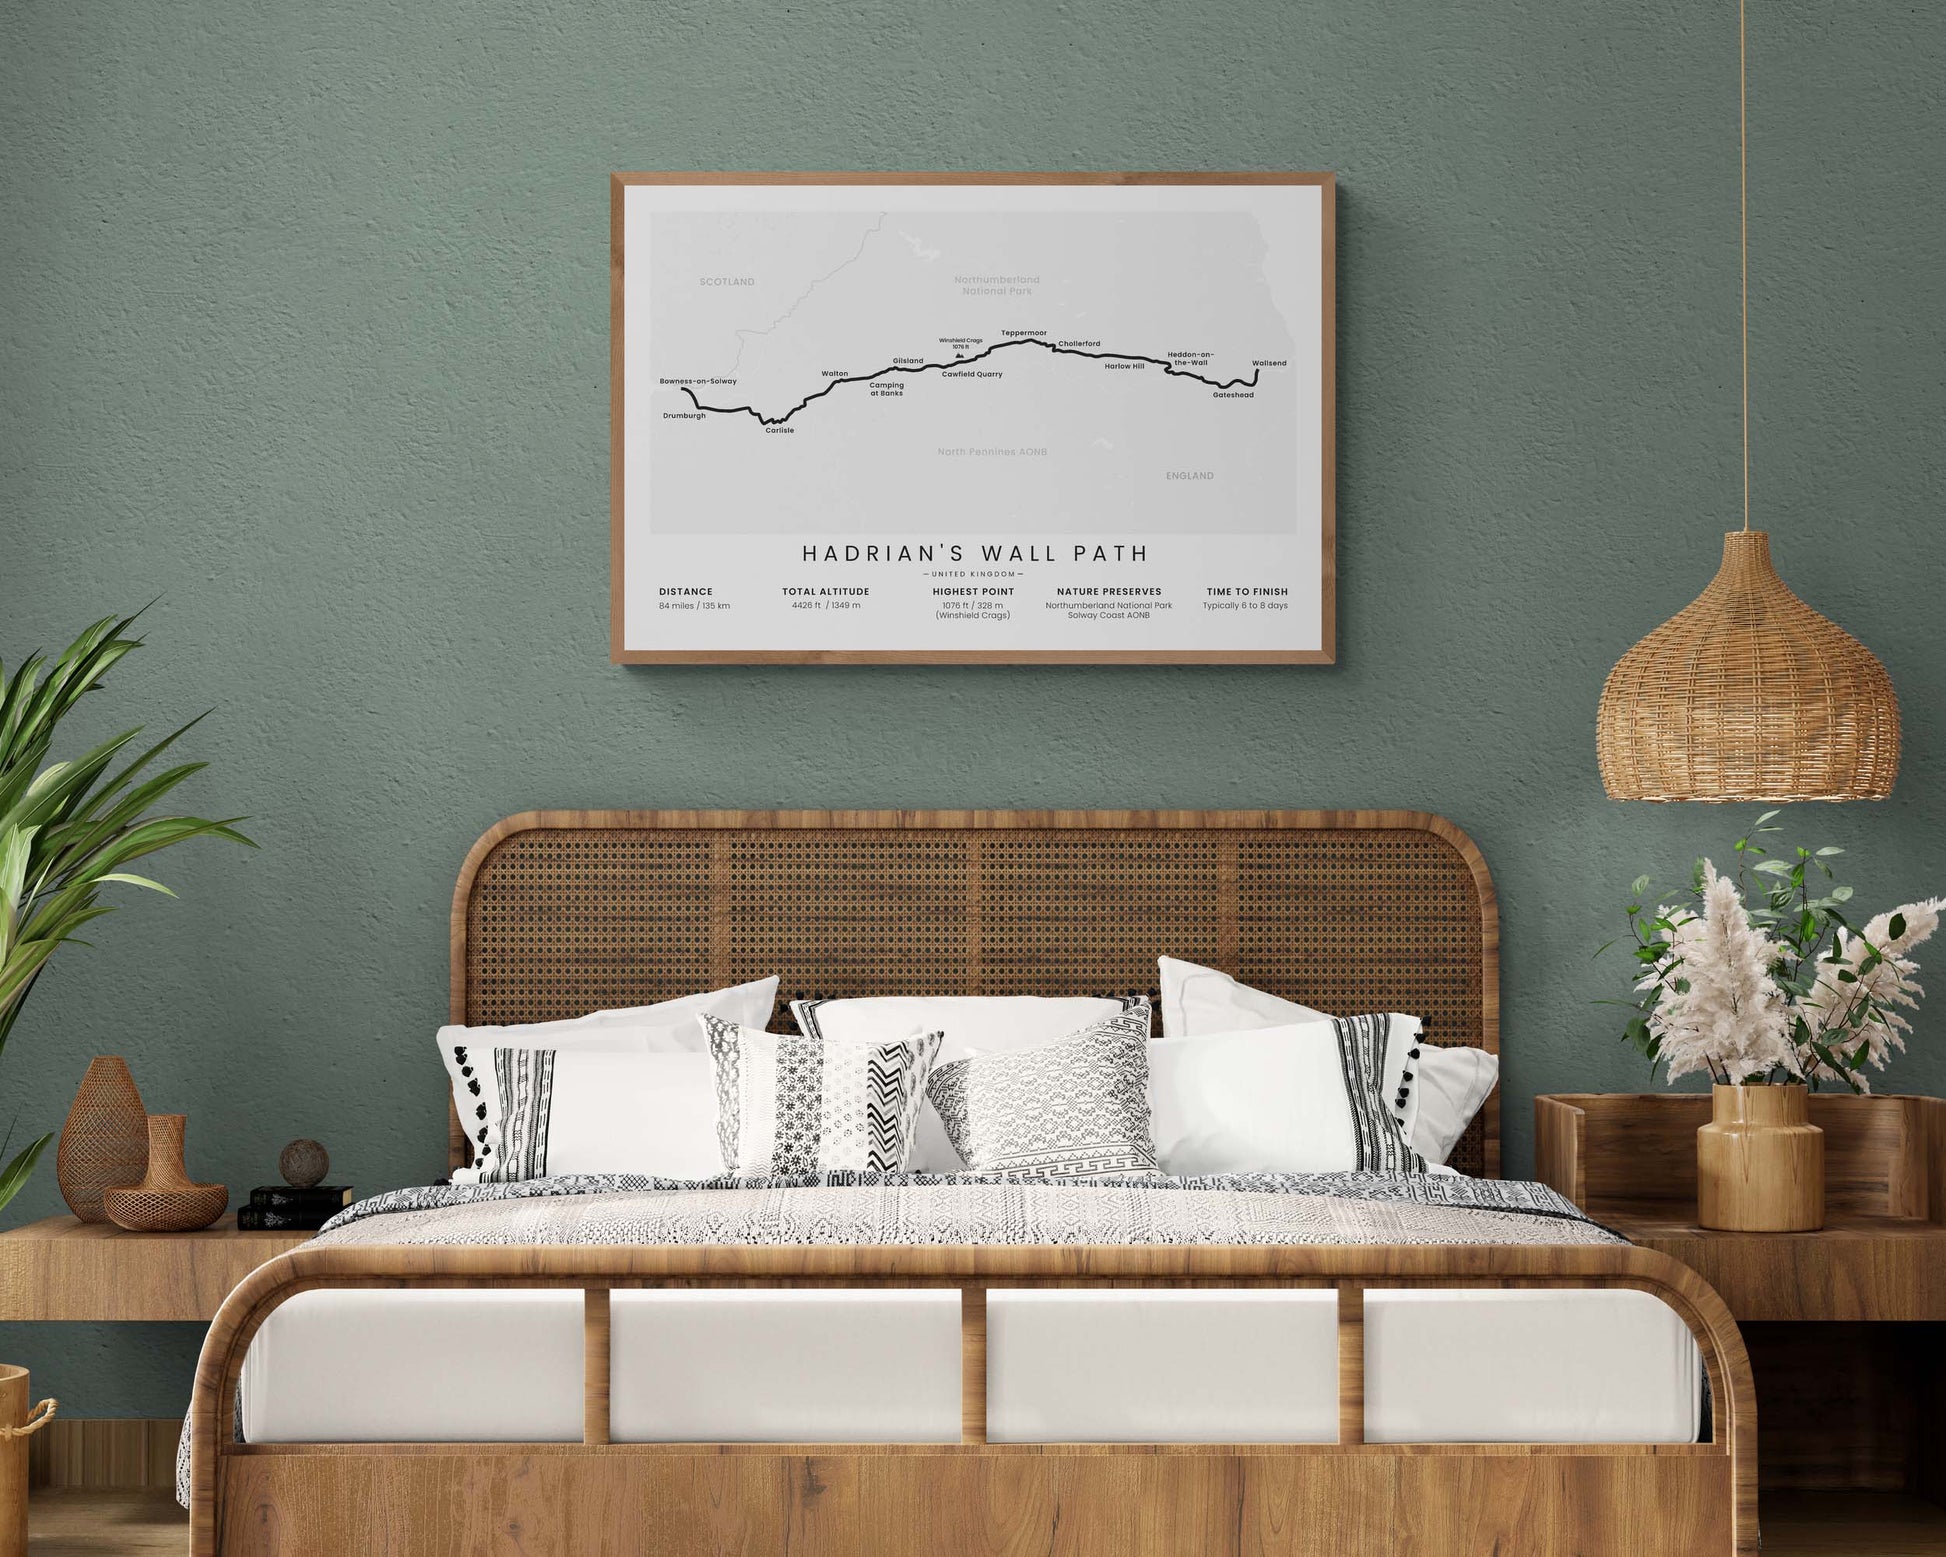 Hadrian's Wall Path (Wallsend to Bowness-on-Solway) route map art in minimal room decor